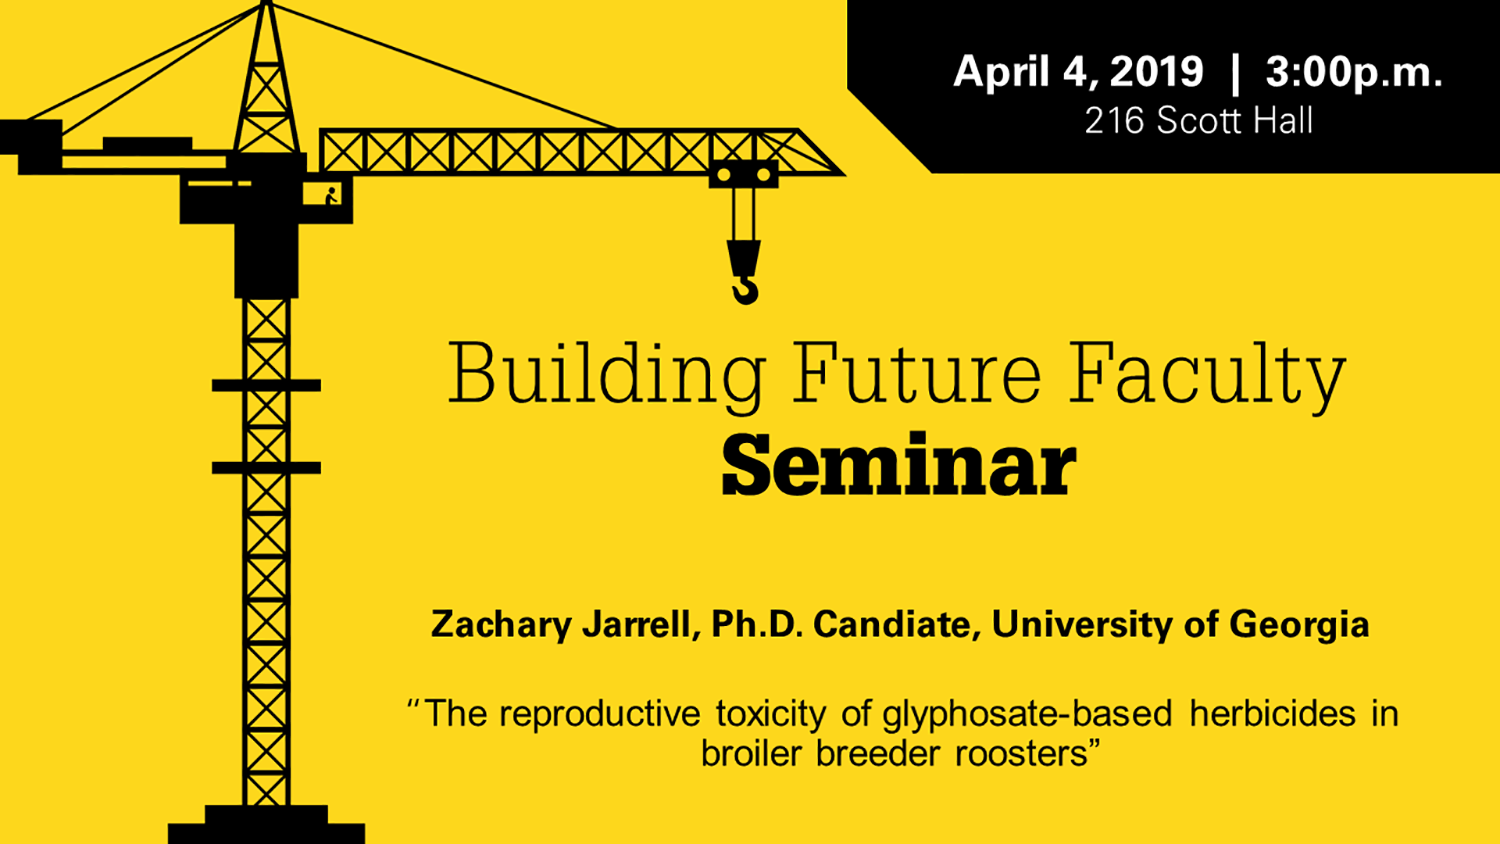 Black and yellow announcement for Zachary Jarrell's seminar